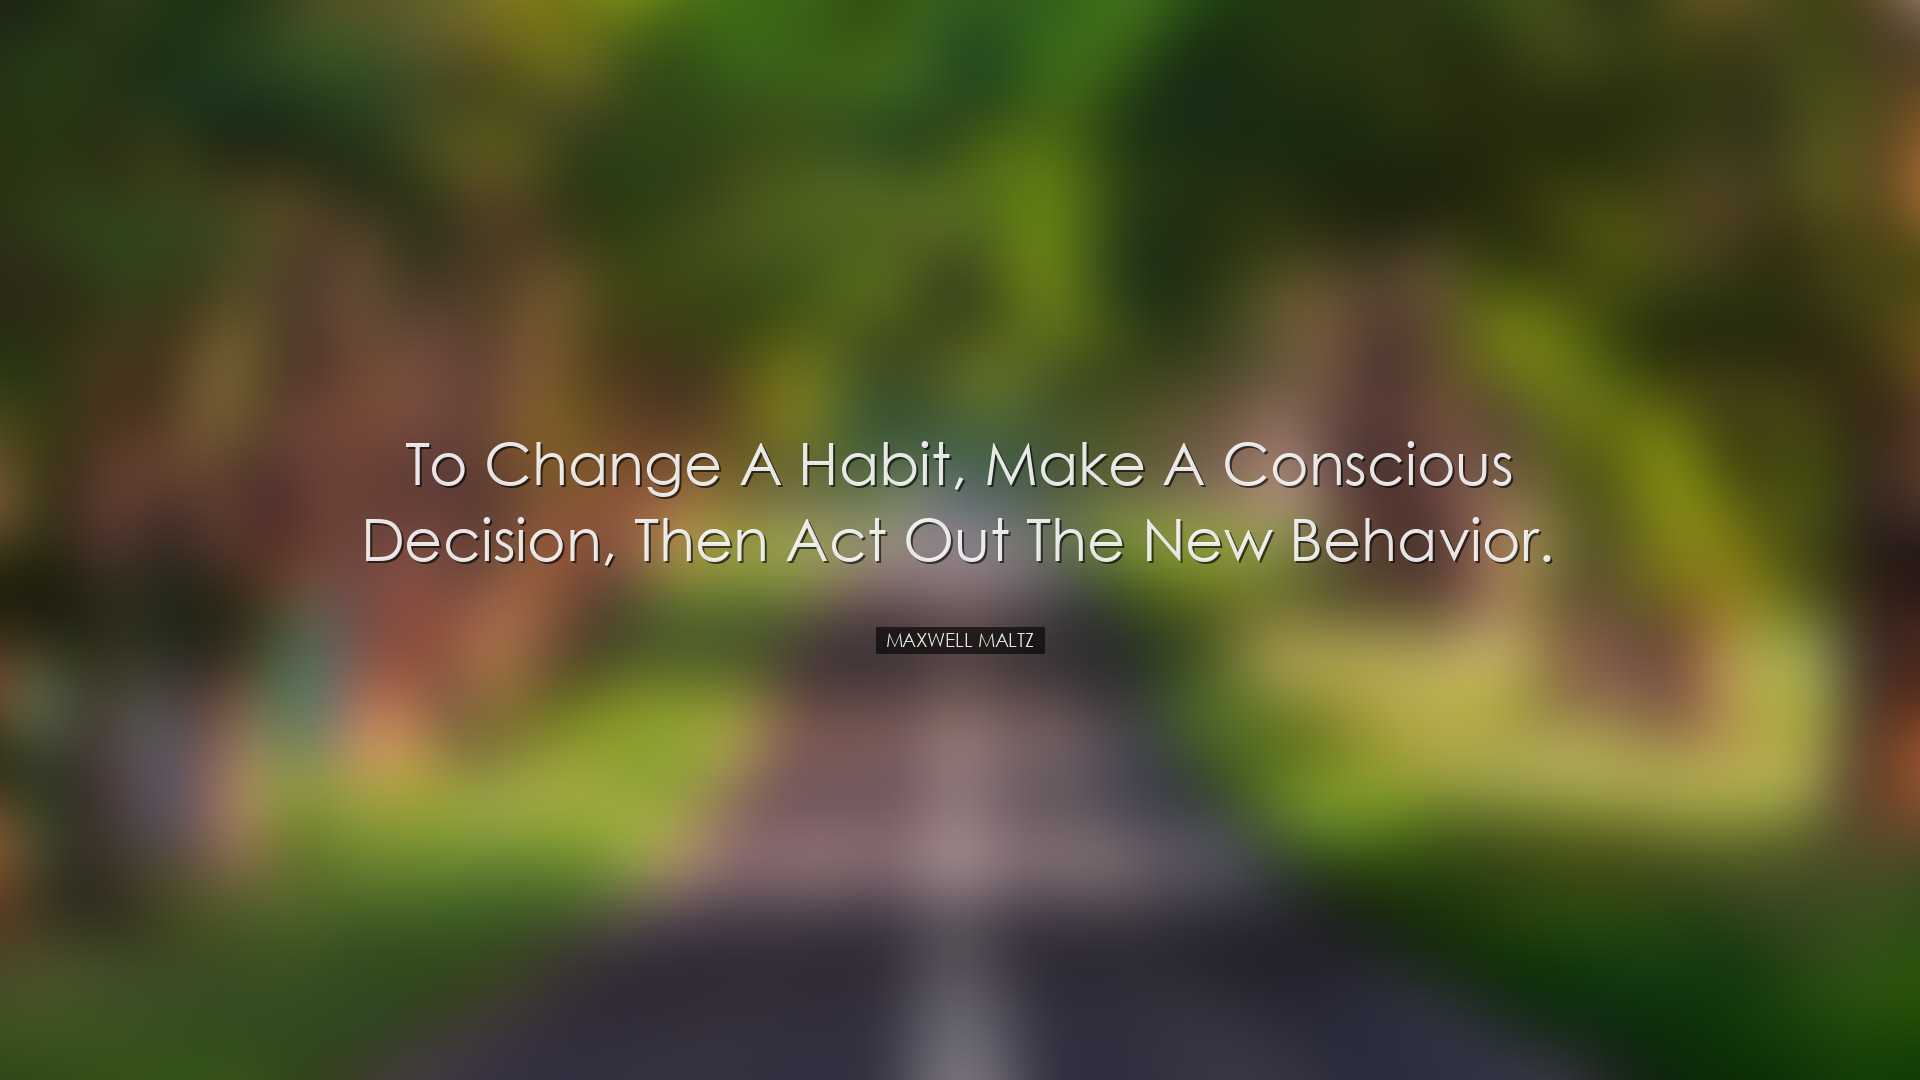 To change a habit, make a conscious decision, then act out the new